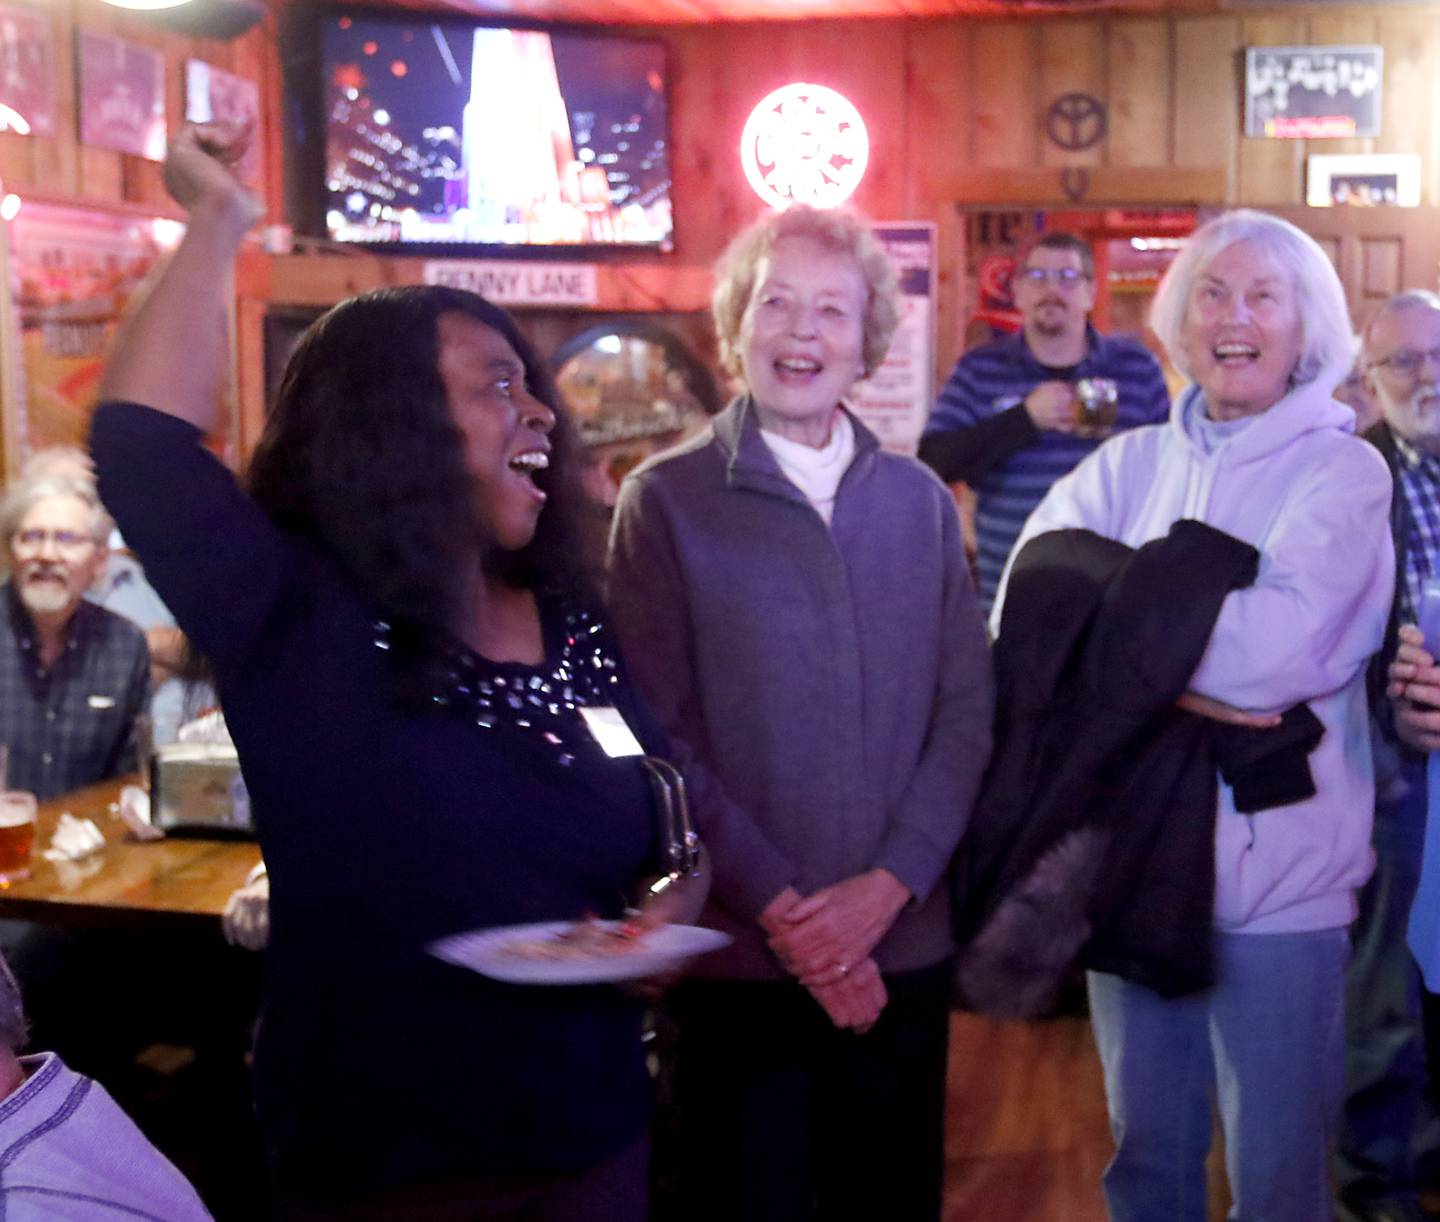 Gloria Van Hof, a candidate for the McHenry County Board in District 2, cheers as results are posted during a Democratic election watch party Tuesday, Nov. 8, 2022, at The Cottage, 6 E. Crystal Lake Ave. in Crystal Lake.